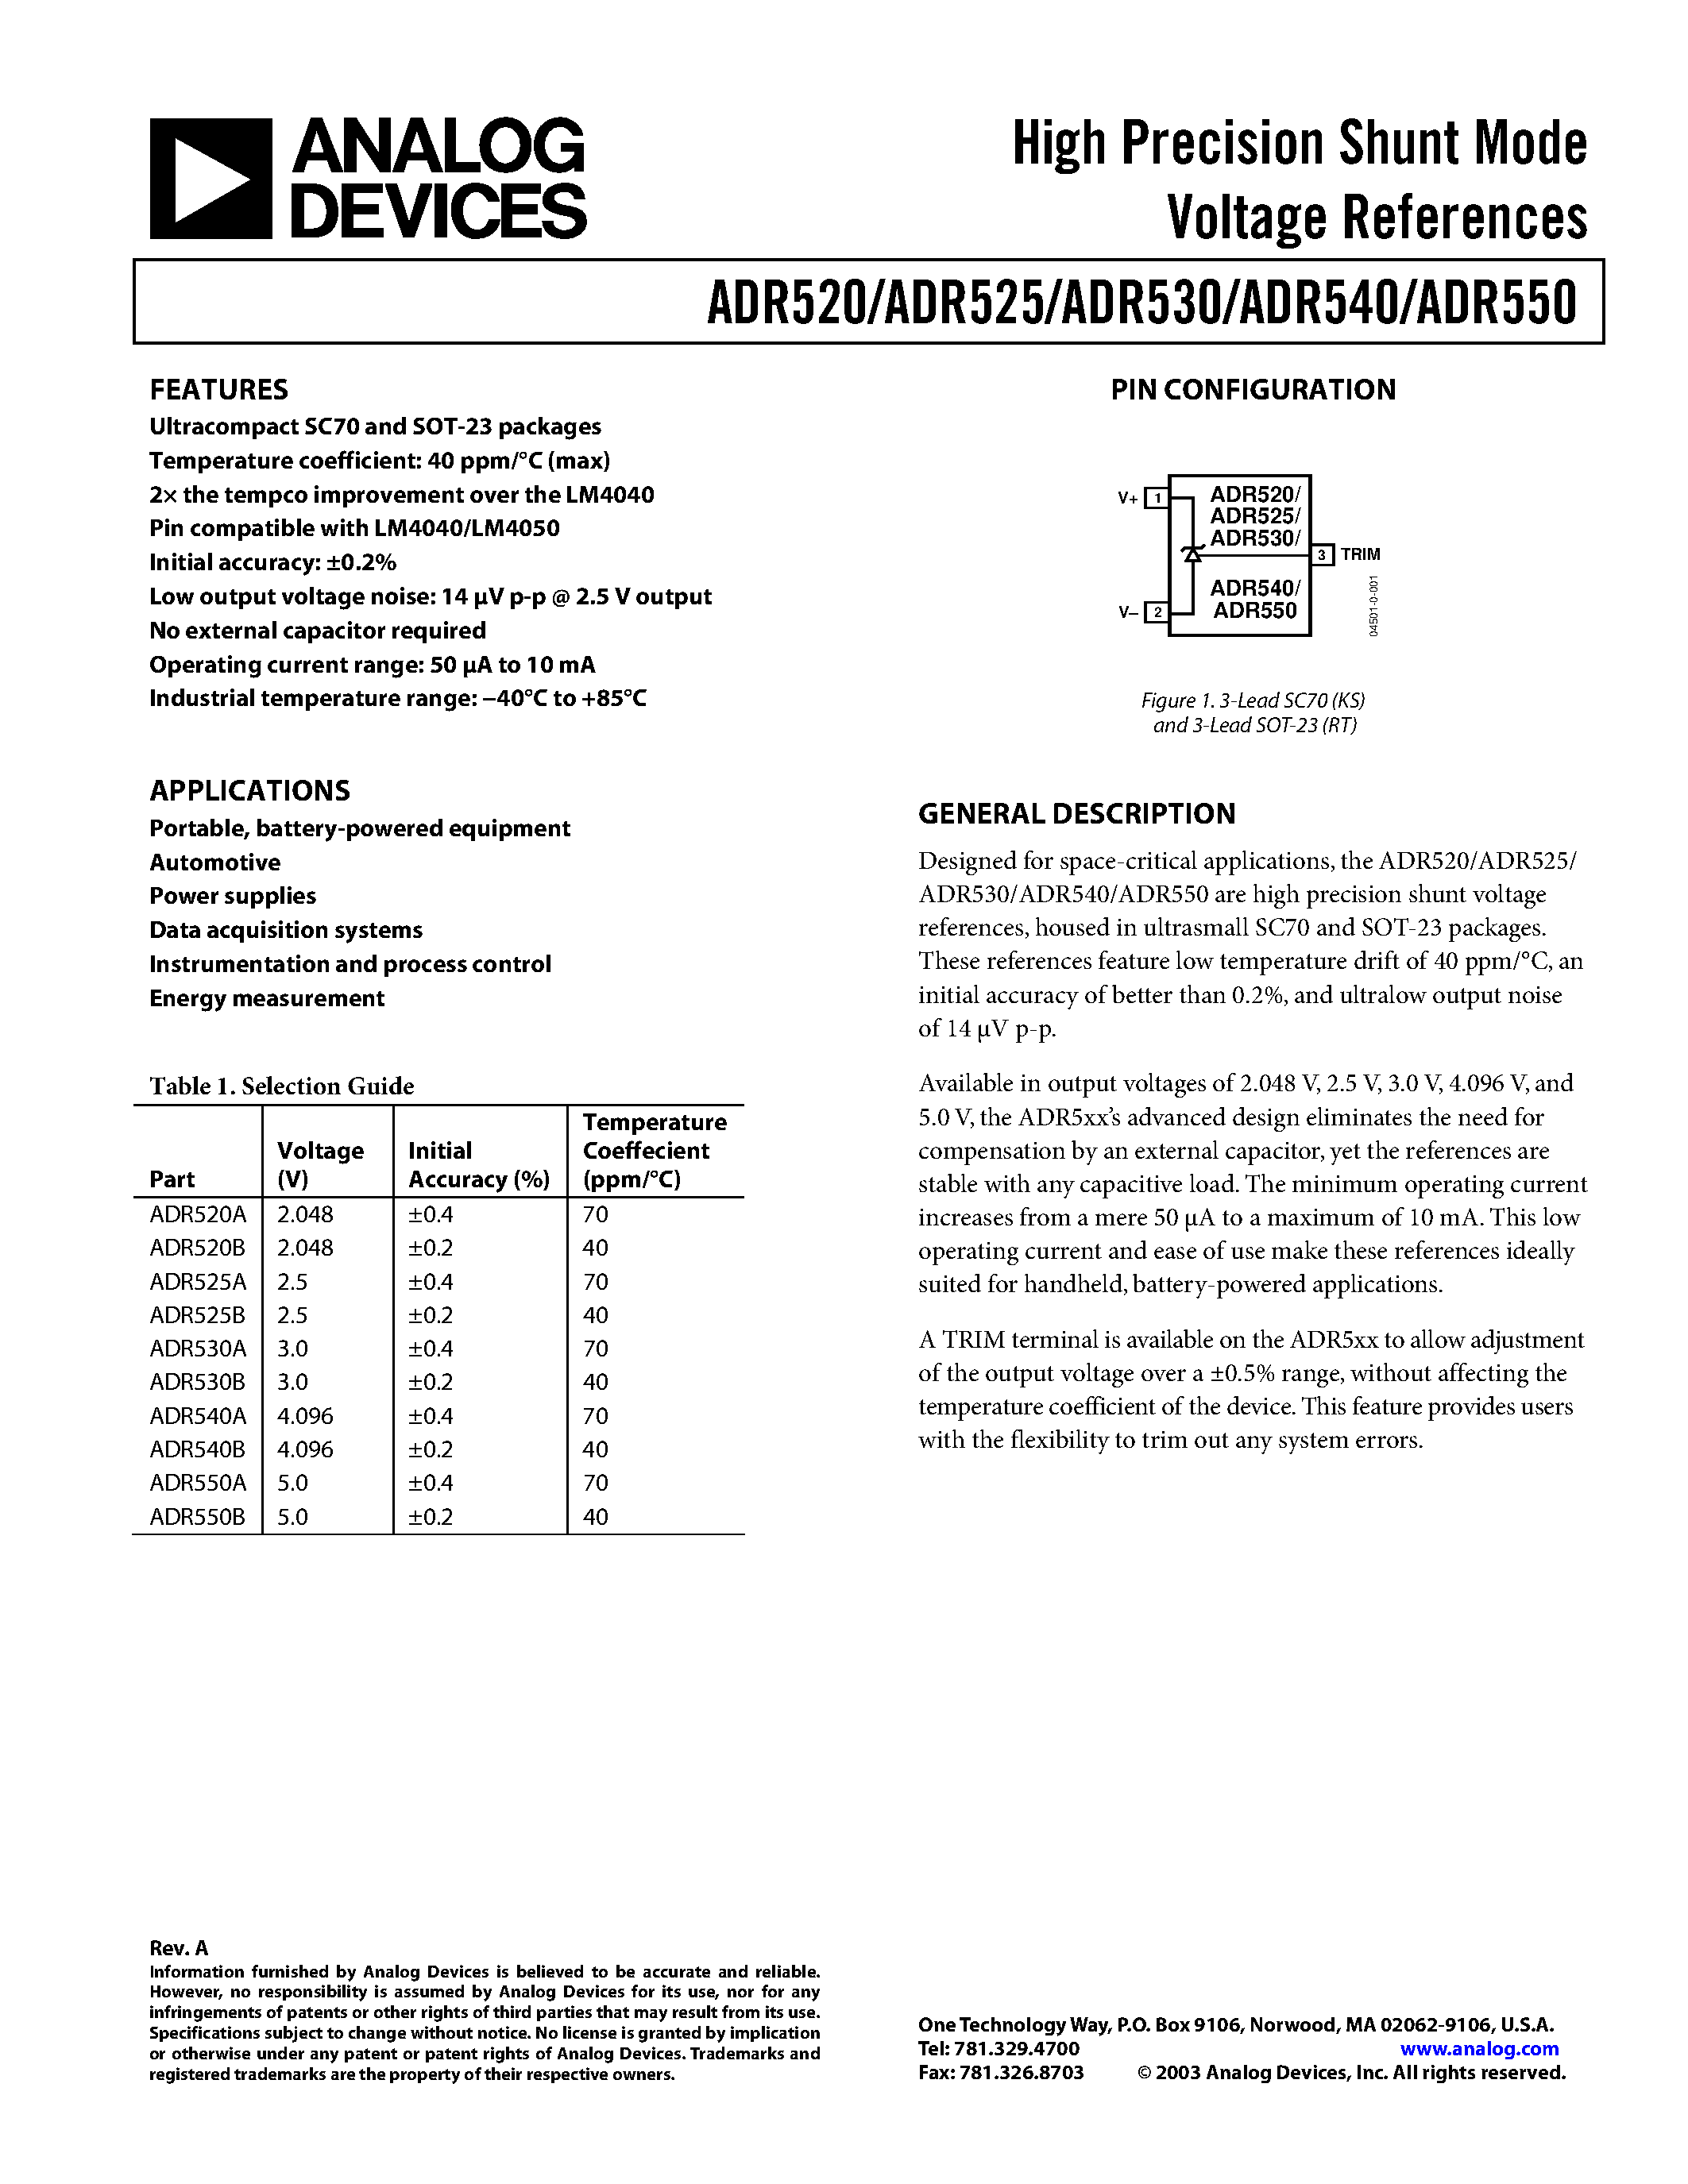 Datasheet ADR530BRT-R2 - High Precision Shunt Mode Voltage References page 1